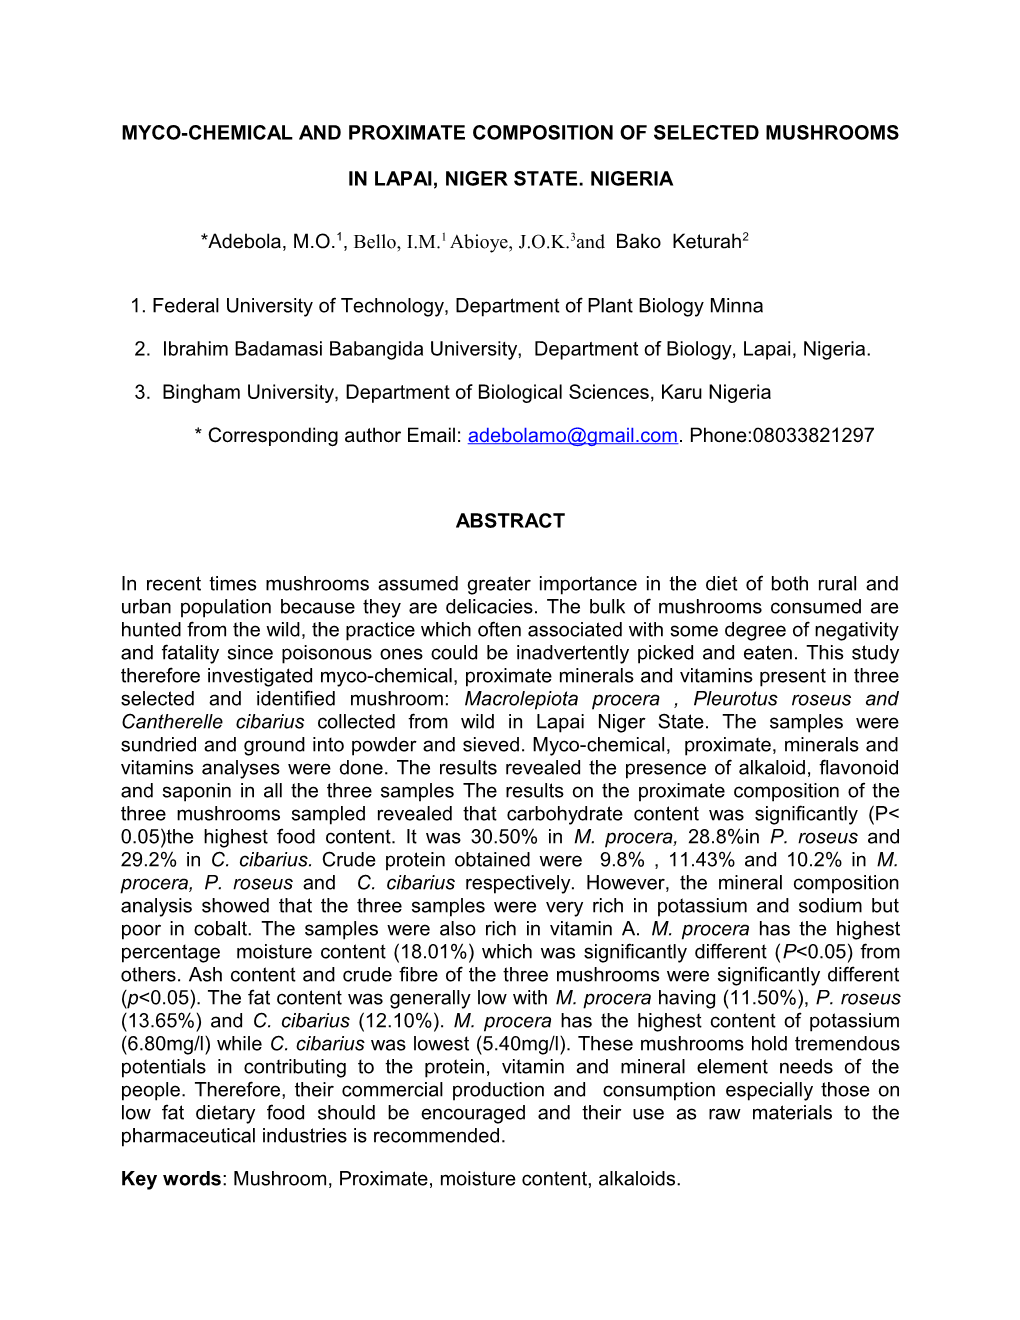 Myco-Chemical and Proximate Composition of Selected Mushrooms in Lapai, Niger State. Nigeria